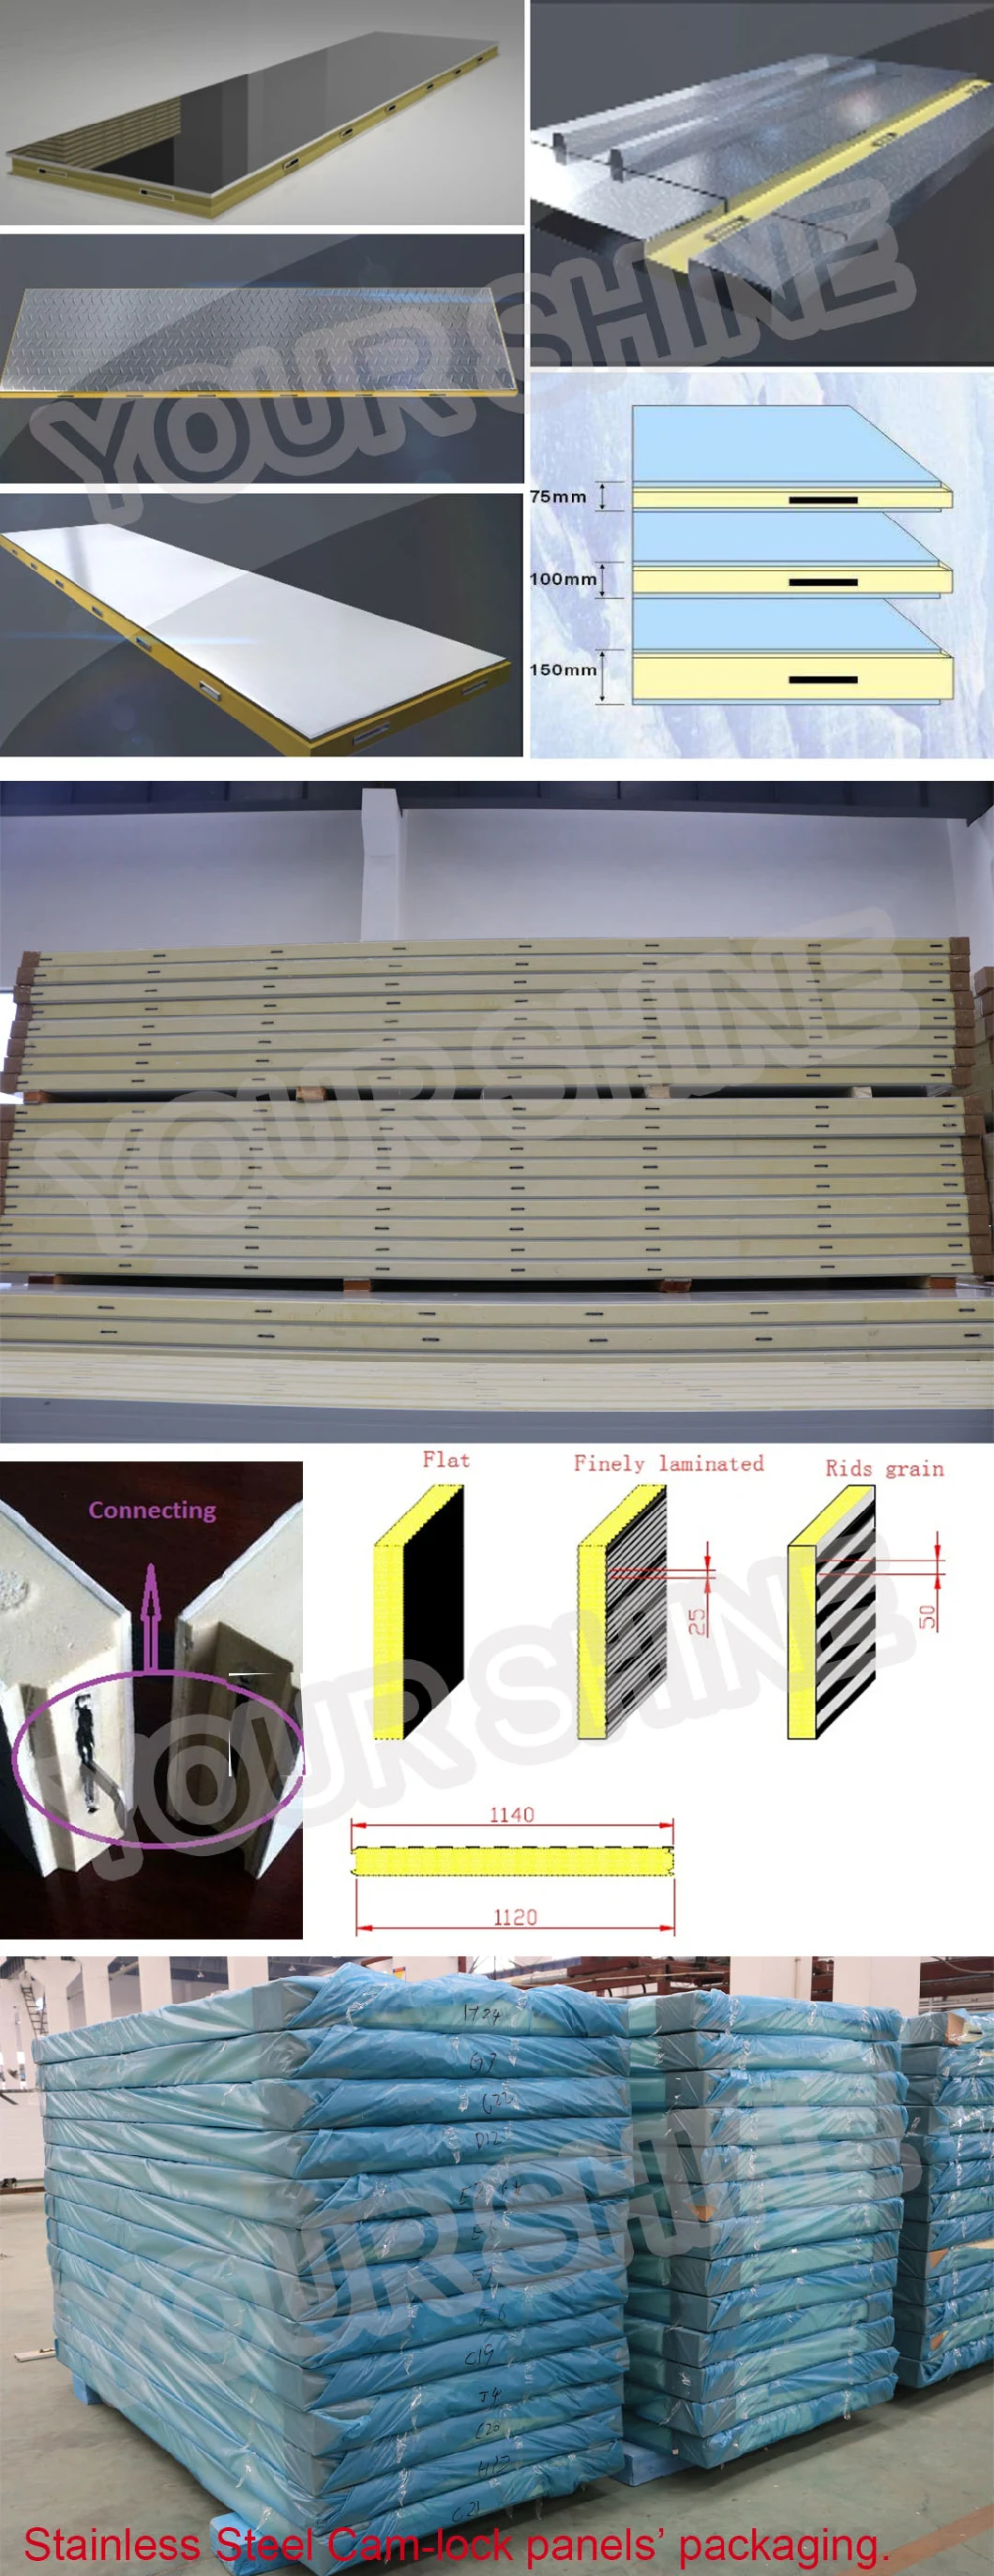 Approved Sandwich Panels for Roof/Wall, Eco-Friendly EPS Sandwich Insulated Interior Wall Panel